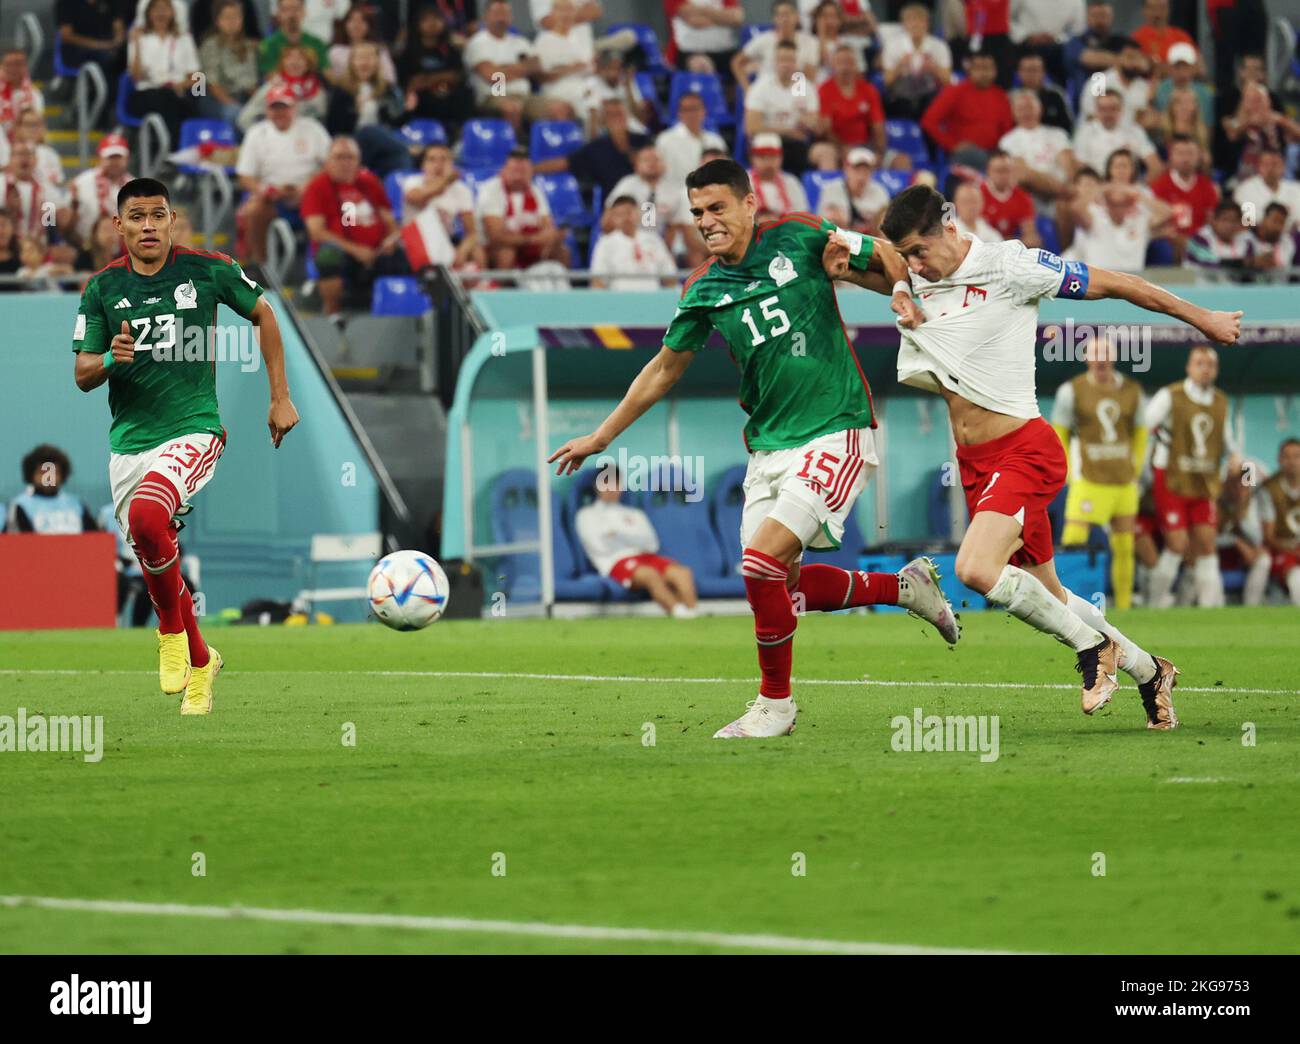 Doha, Qatar. 22nd Nov, 2022. Soccer: World Cup, Mexico - Poland, Preliminary round, Group C, Matchday 1, Stadium 974, Robert Lewandowski (r) of Poland is fouled by Hector Moreno (M) of Mexico in the penalty area. Lewandowski is unable to convert the subsequent penalty kick. Jesus Gallardo of Mexico is on the left. Credit: Christian Charisius/dpa/Alamy Live News Stock Photo